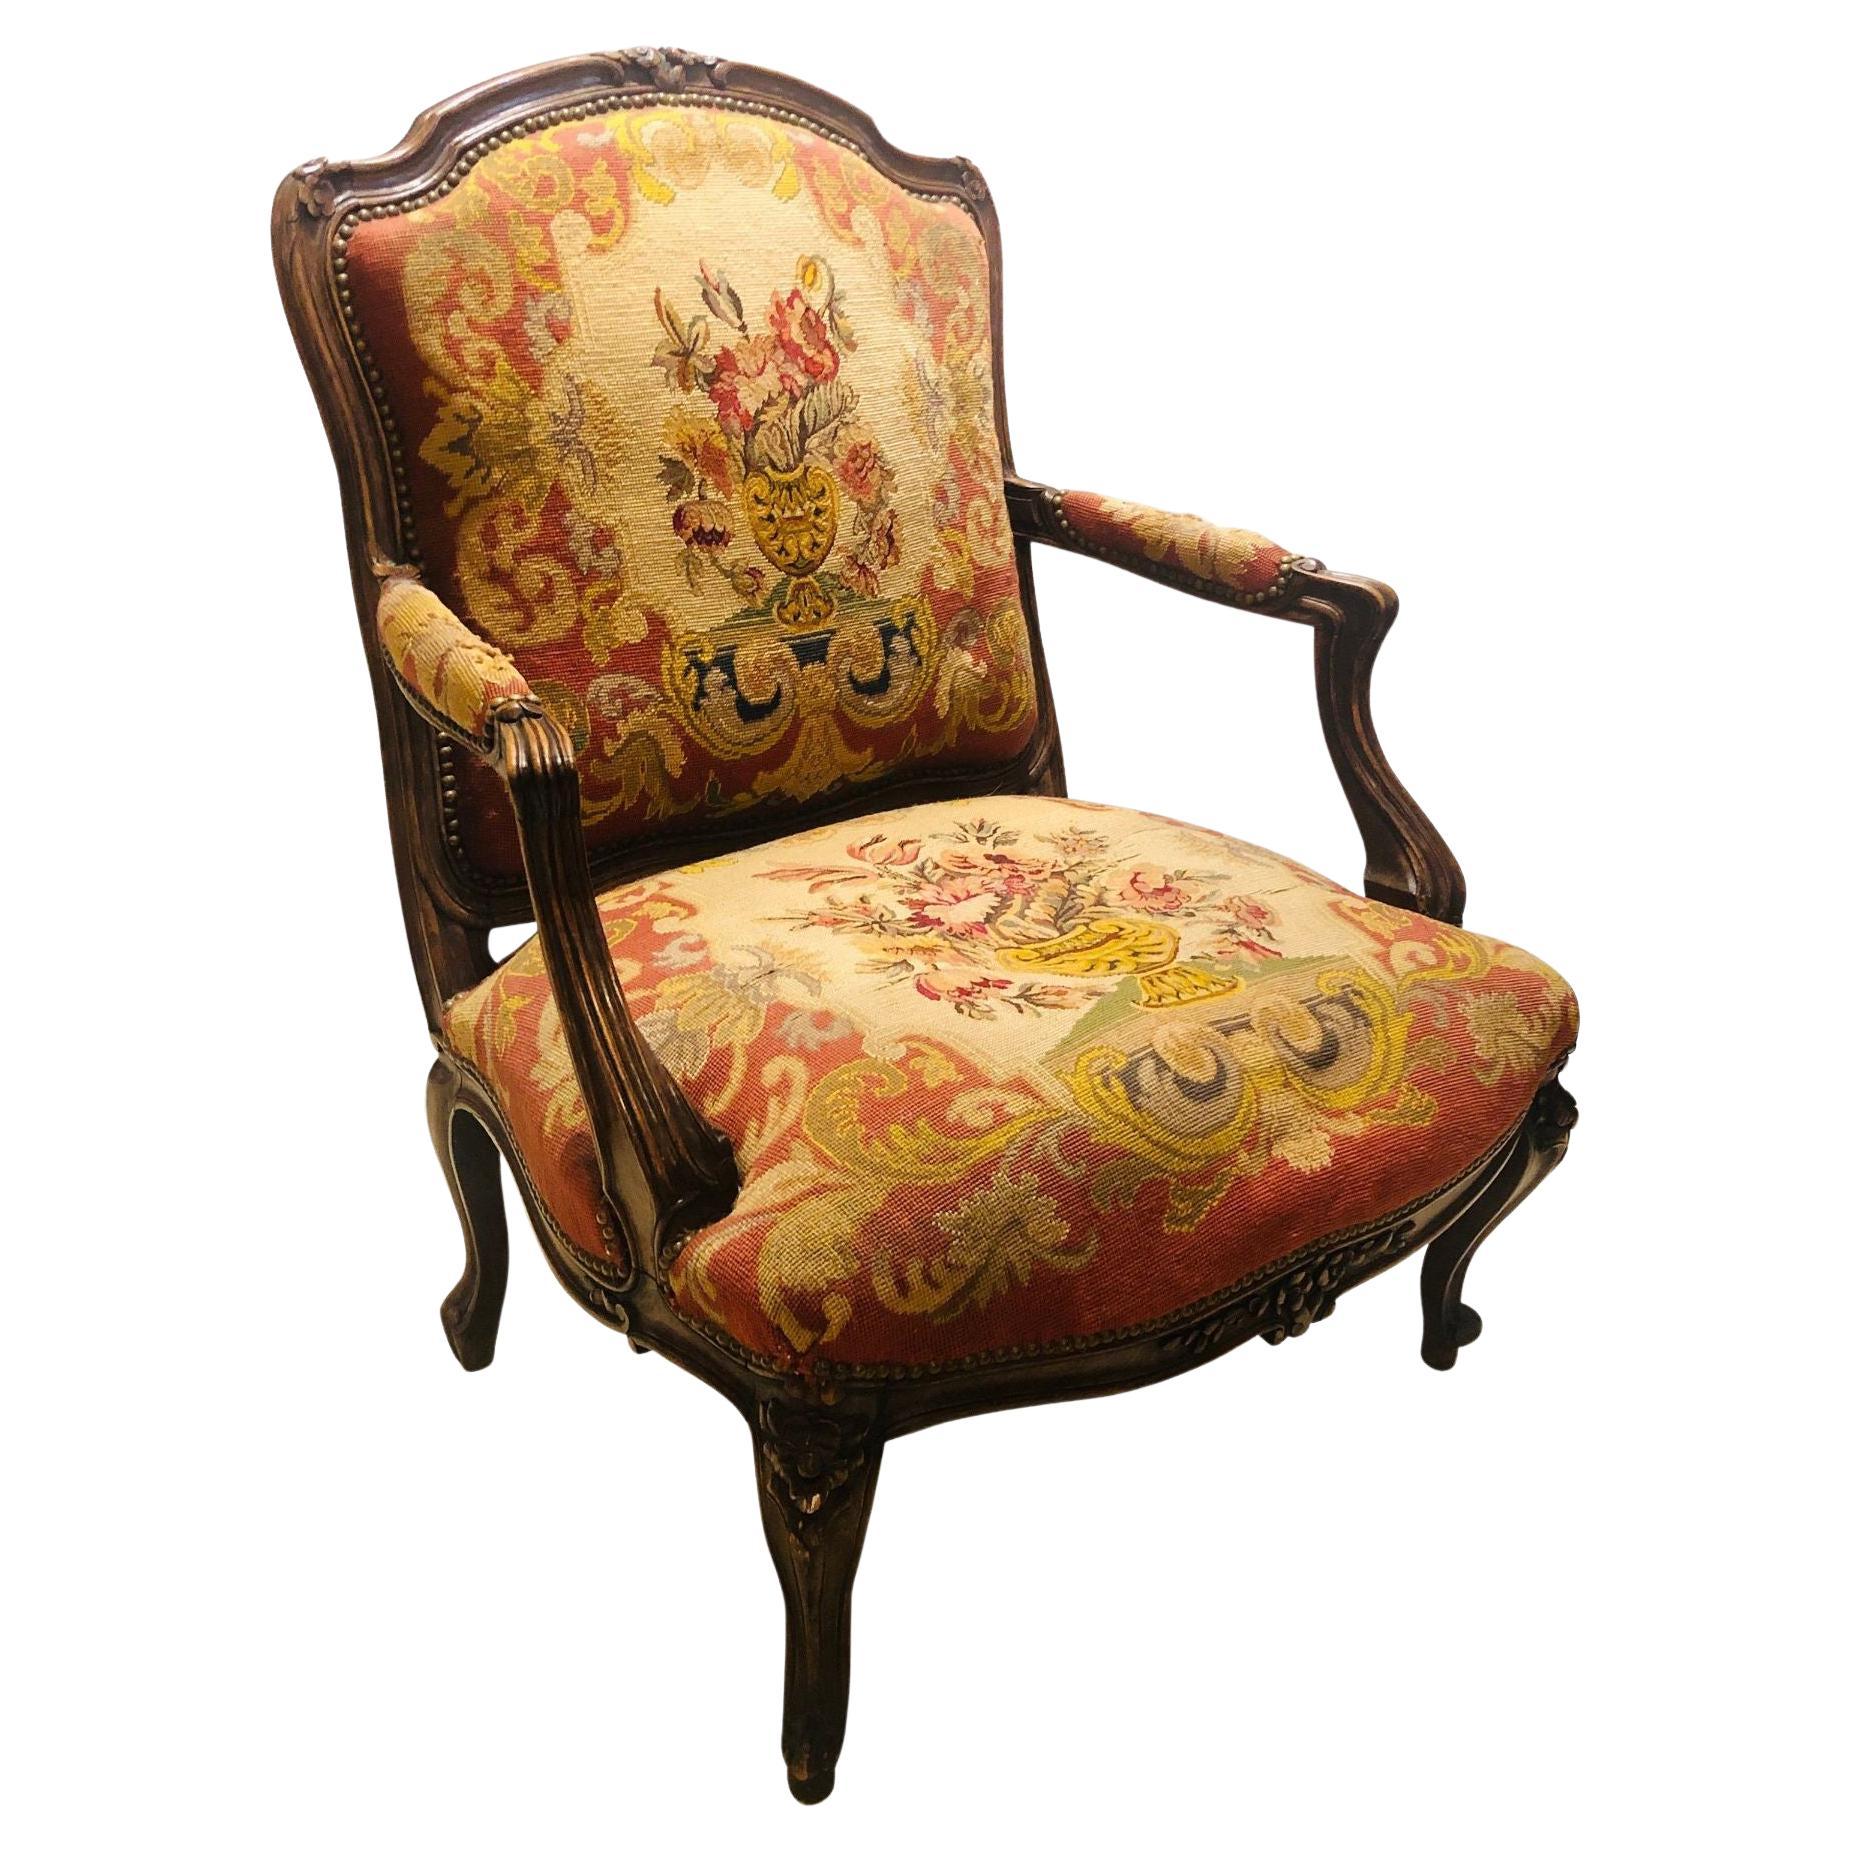 19th Century Louis XV Style Armchair Bergere Petite and Gros Point Upholstery For Sale